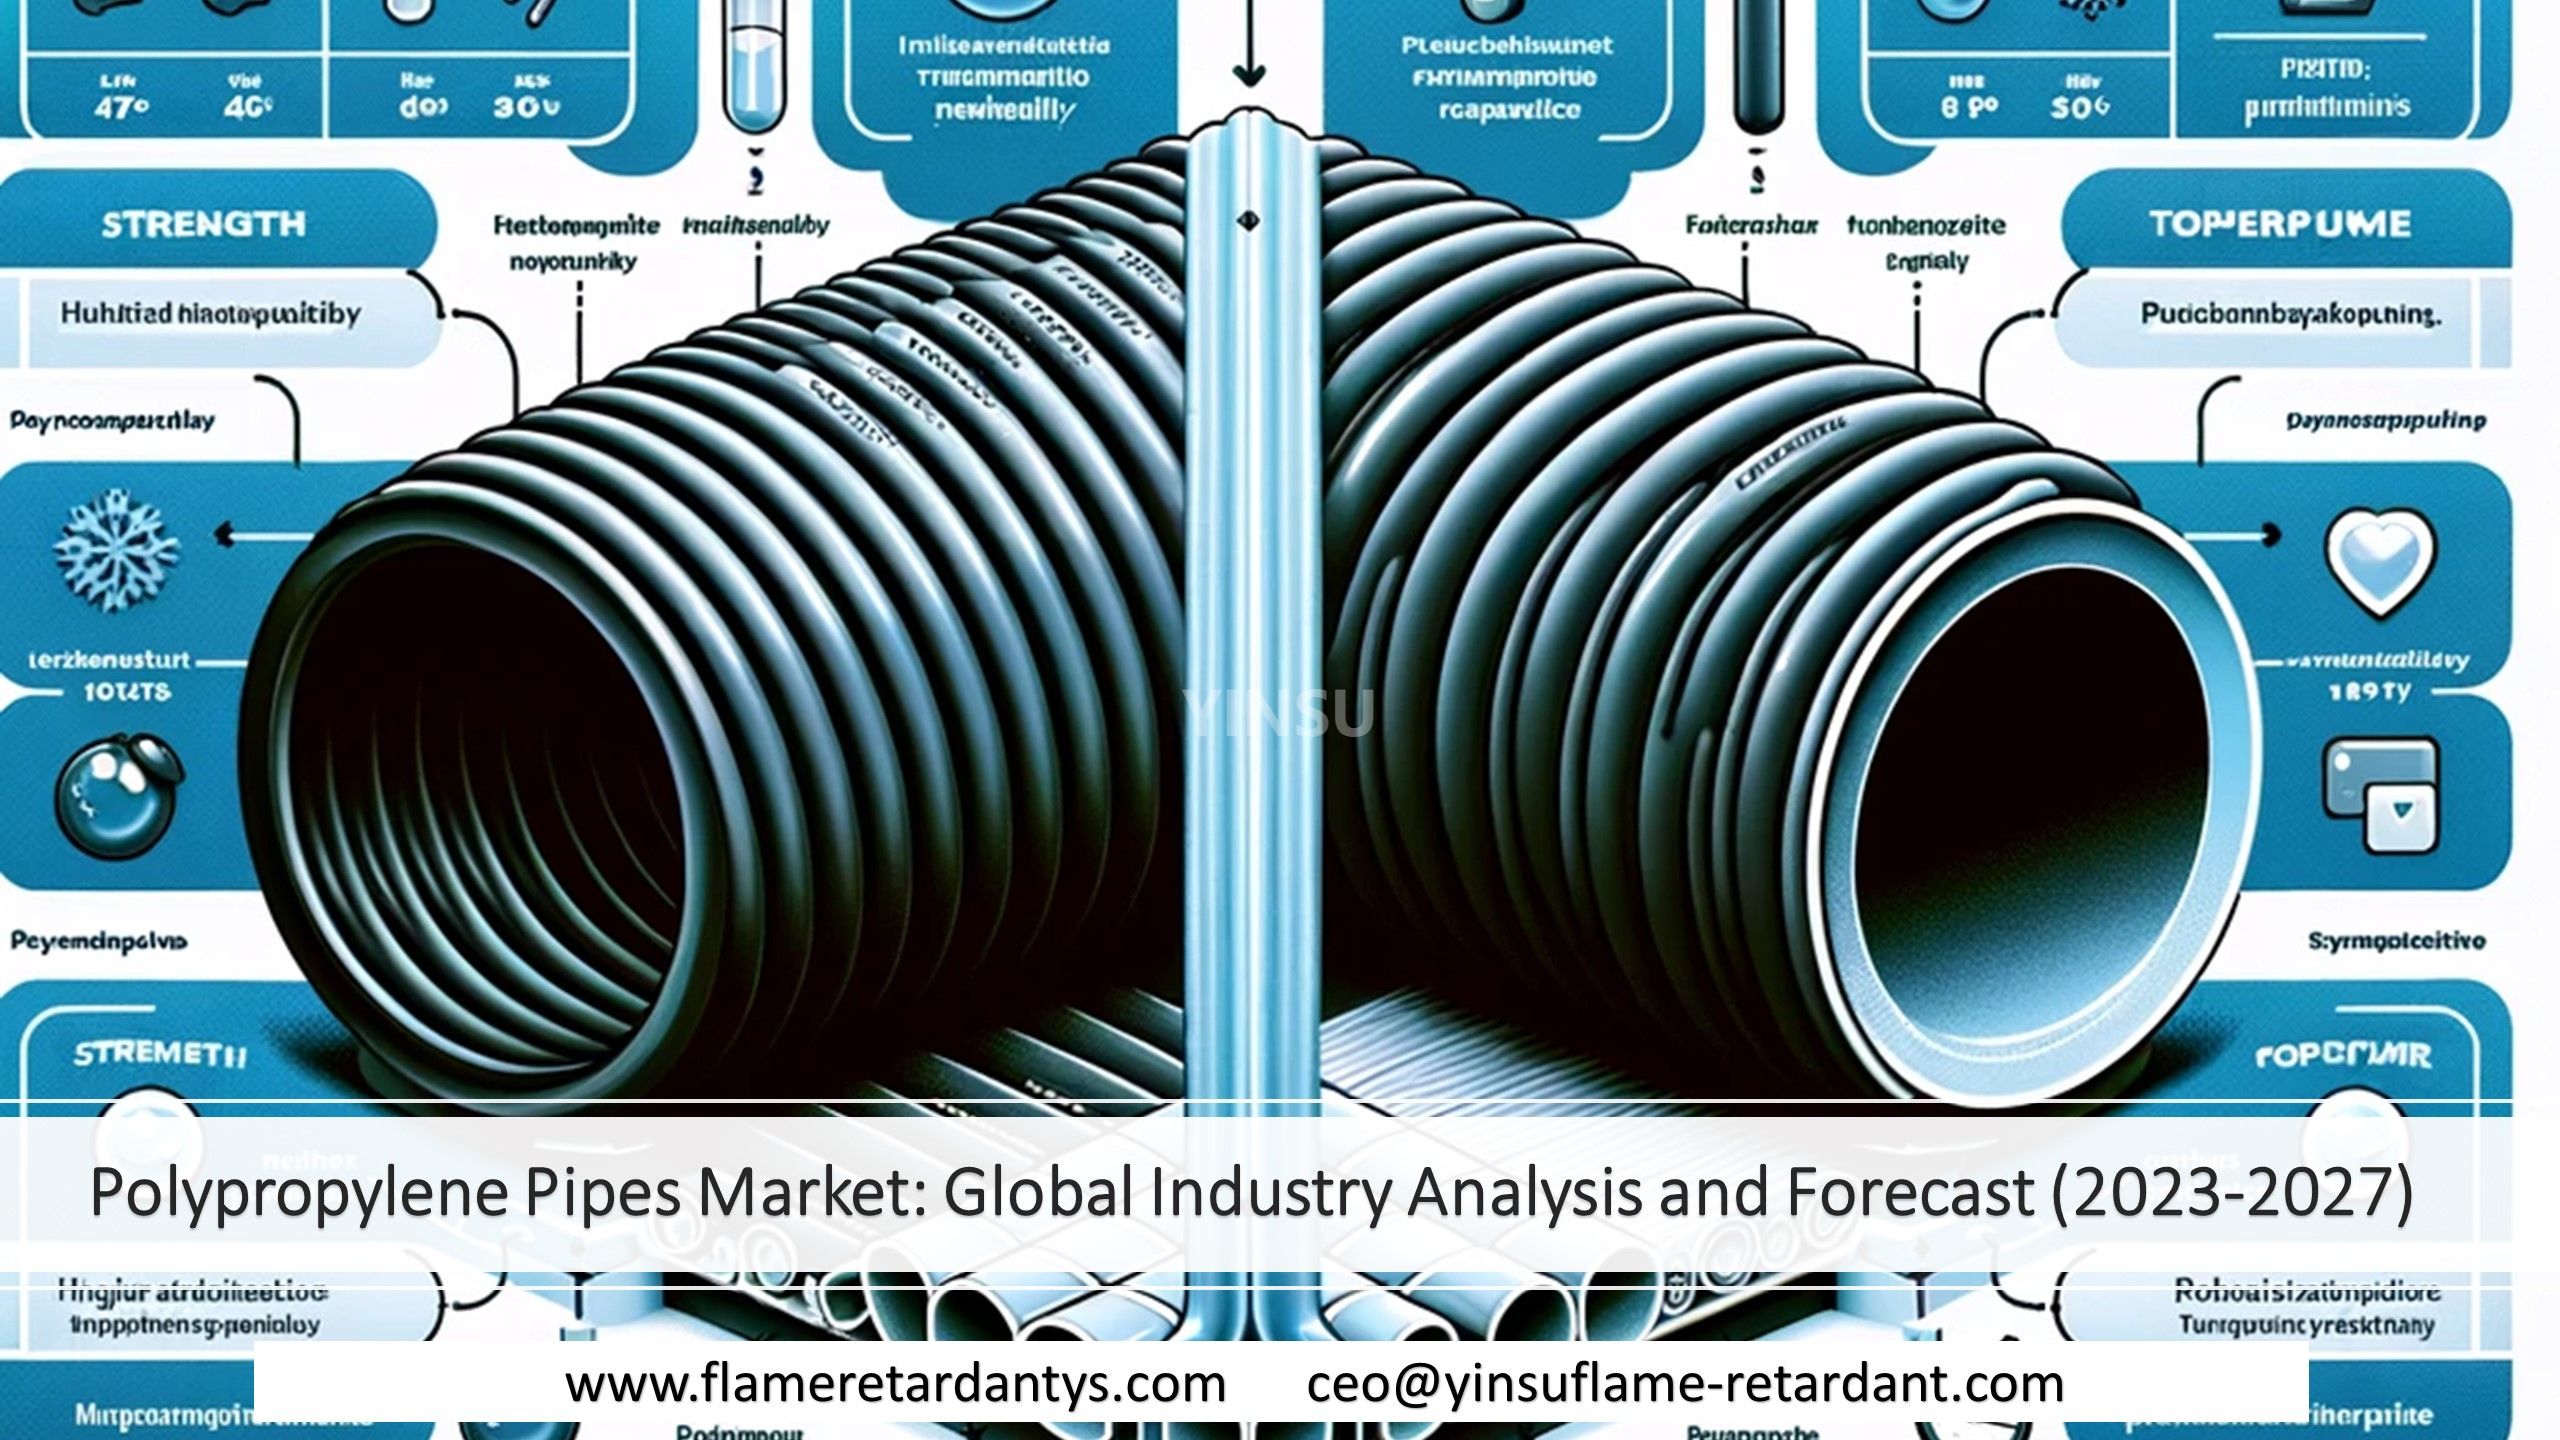 Polypropylene Pipes Market: Global Industry Analysis and Forecast (2023-2027)